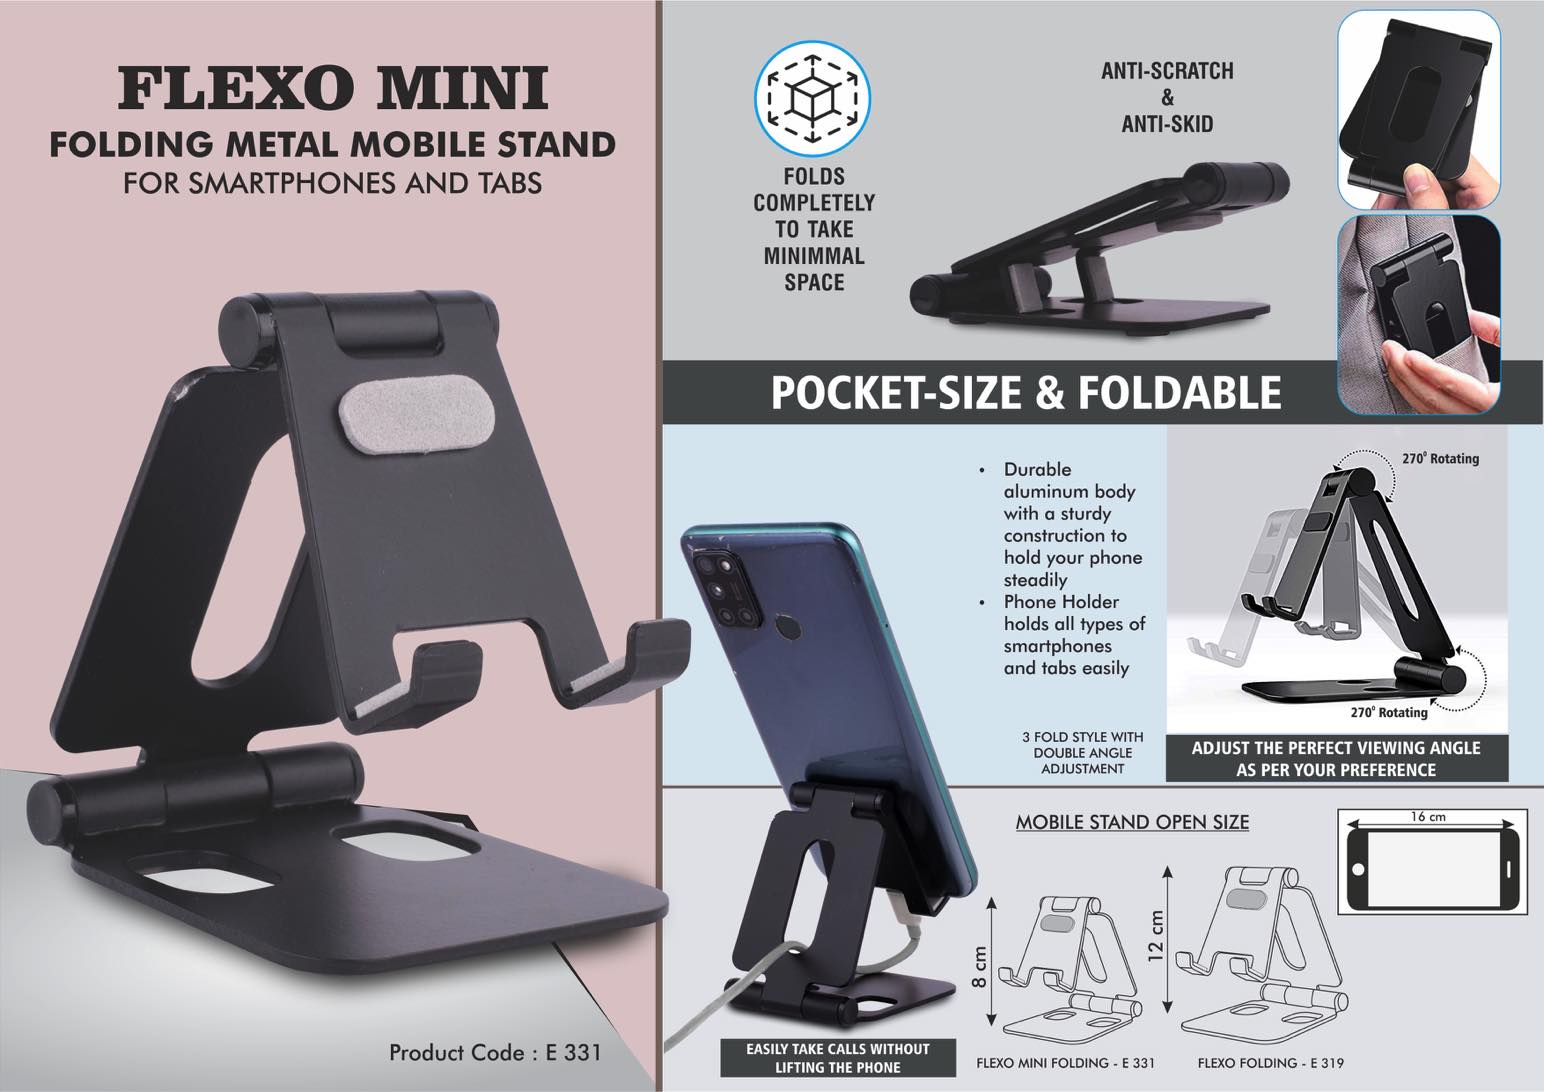 Flexo Mini: Folding Metal Mobile Stand For Smartphones And Tabs | Folds Completely To Take Minimal Space | 3 Fold Style With Double Angle Adjustment